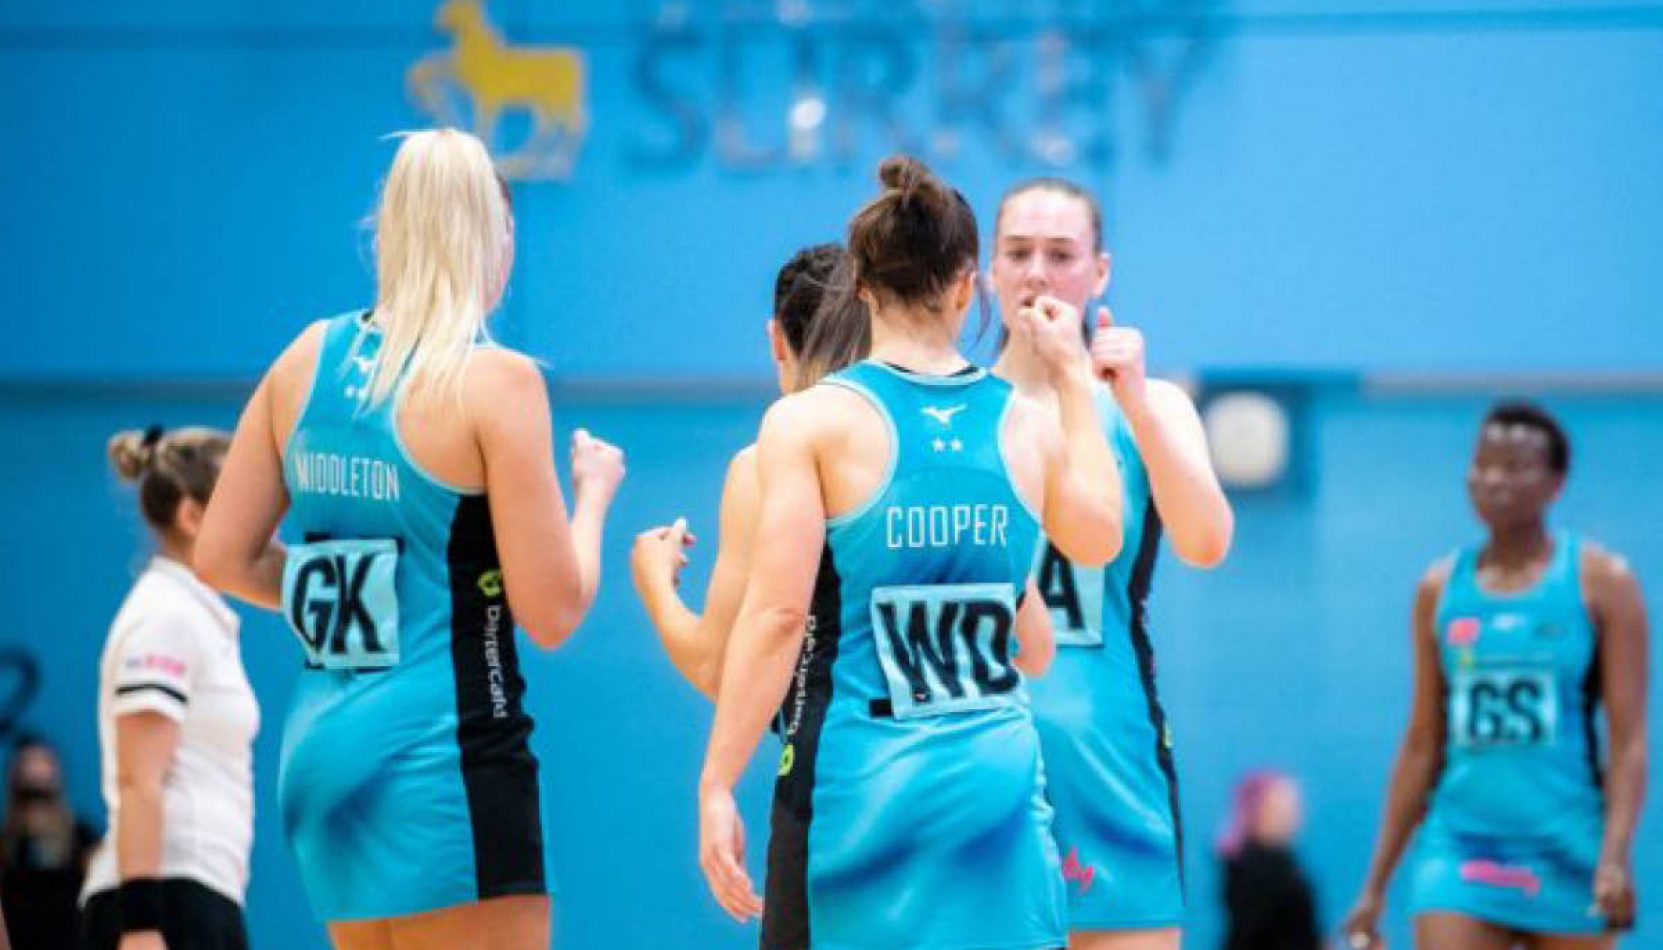 surrey storm, netball, the sports locker, the guide to surrey, guide to surrey, guide to , guide to whats on, sports events, sports fixtures, running, basketball, april 2022